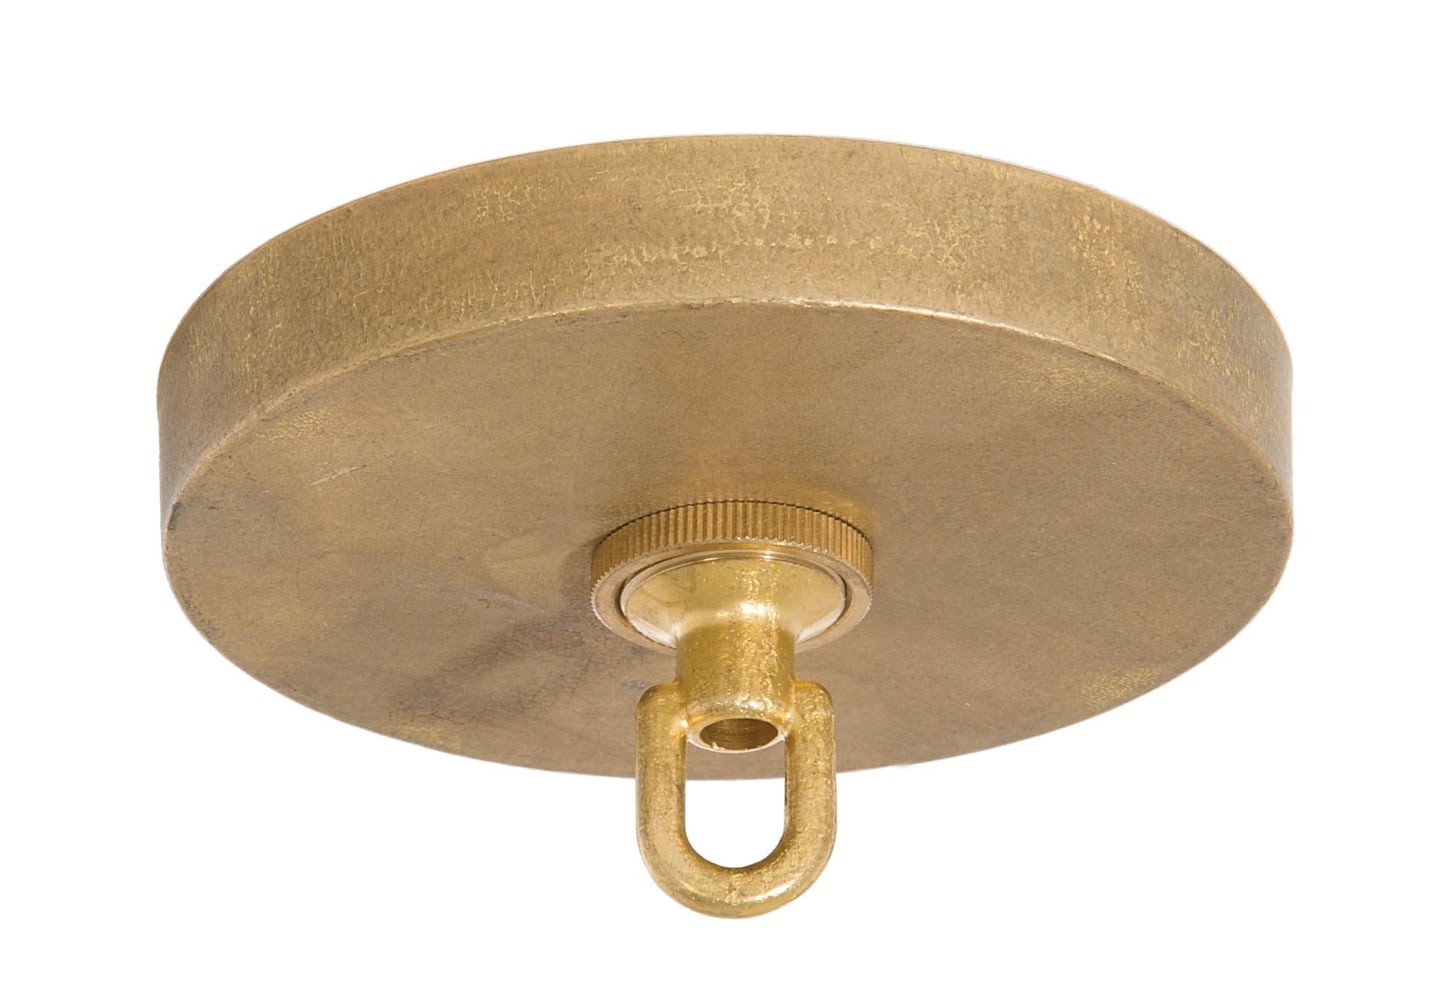 5 Inch Diameter Top Quality Unfinished Die Cast Brass Modern Canopy With Screw Collar Loop & Ceiling Hardware